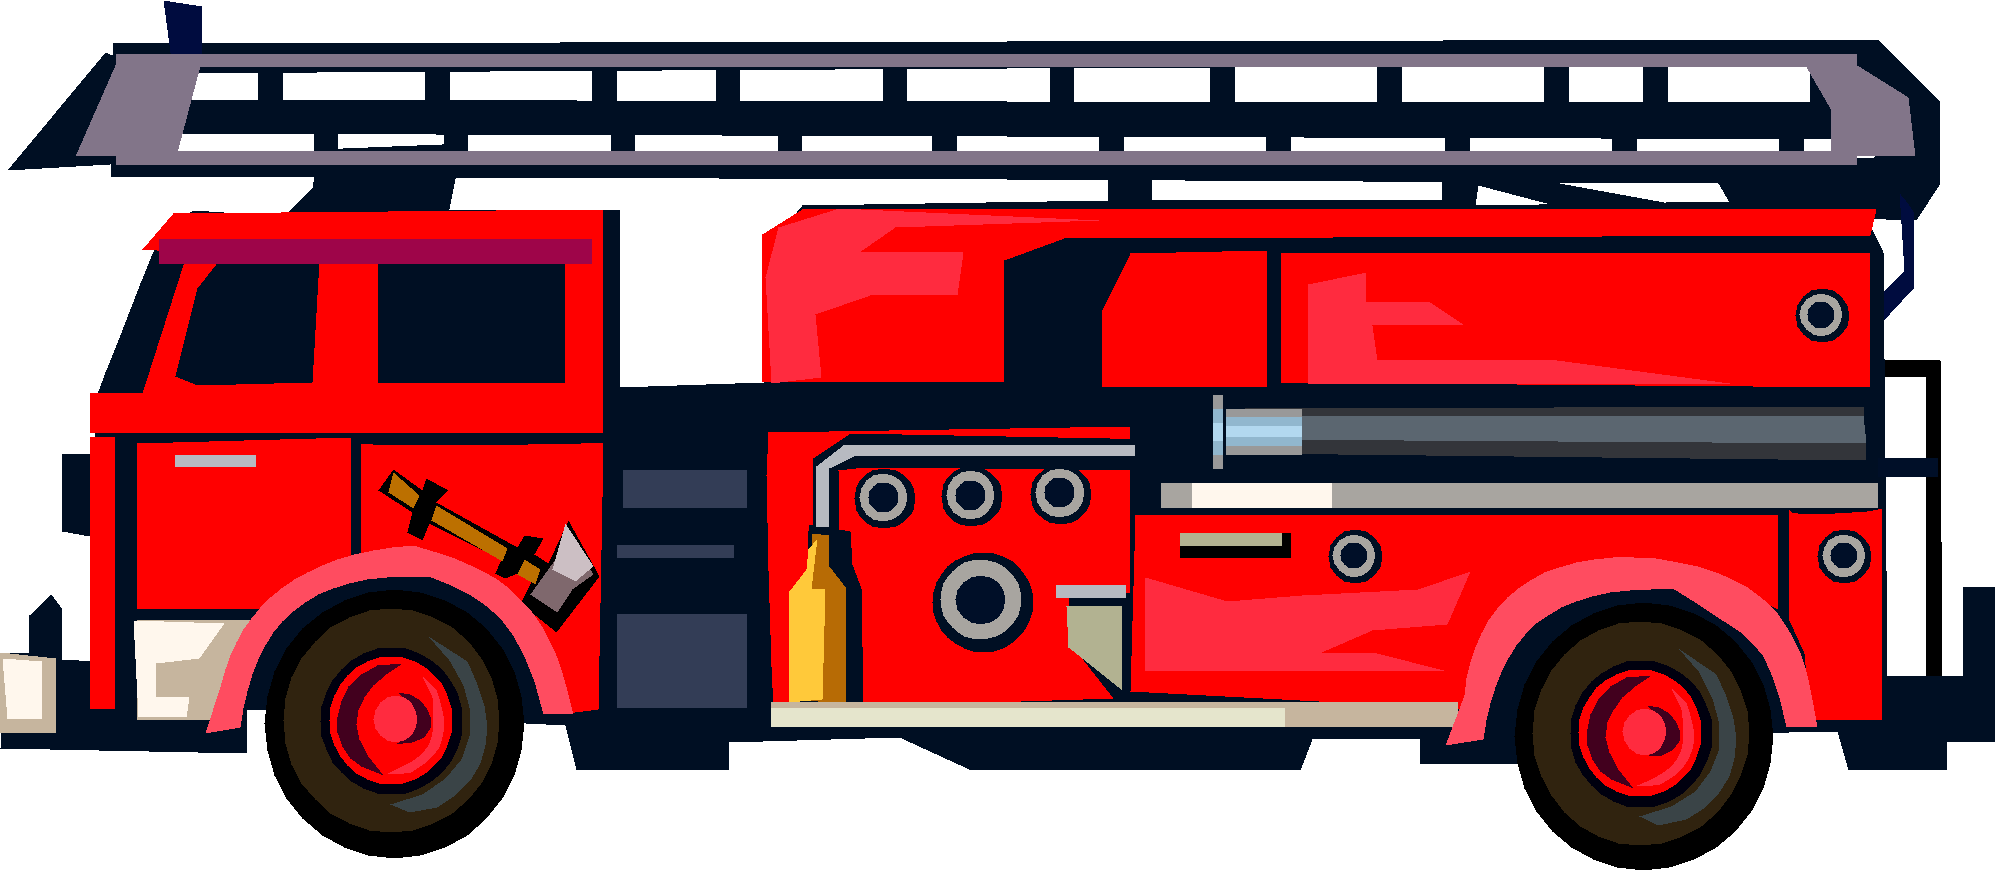 How To Draw A Fire Truck - ClipArt Best